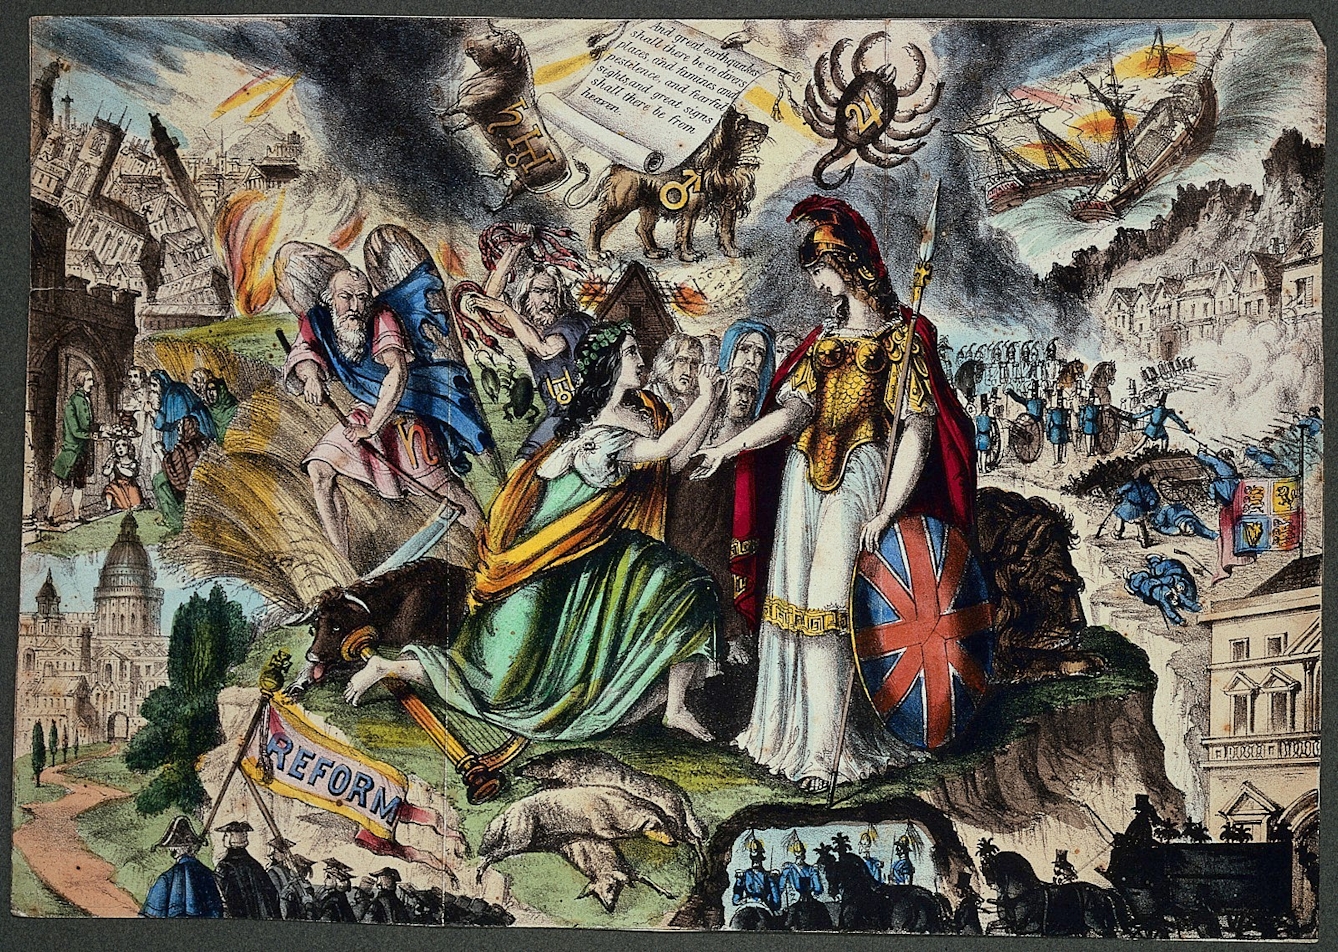 Image of lithograph depicting a non-realistic satirical scene involving classical looking women dressed up to represent Ireland praying to Britain